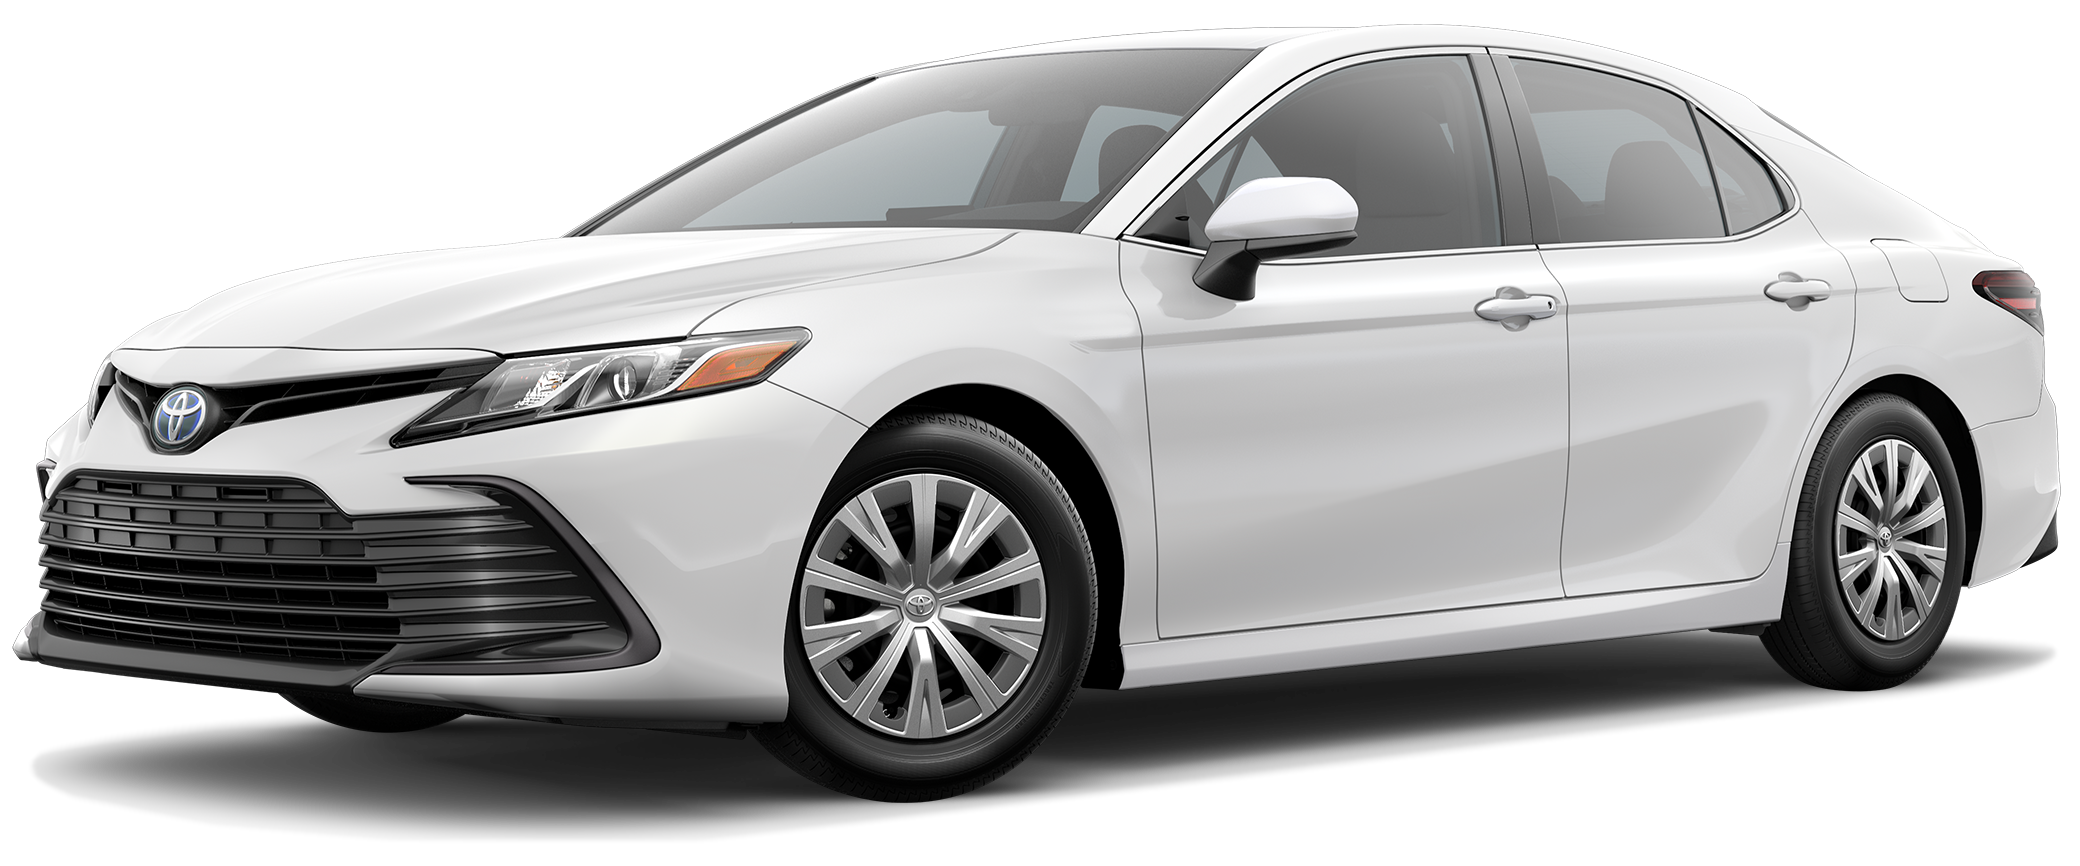 2022 Toyota Camry Hybrid Incentives, Specials & Offers in Carlsbad CA